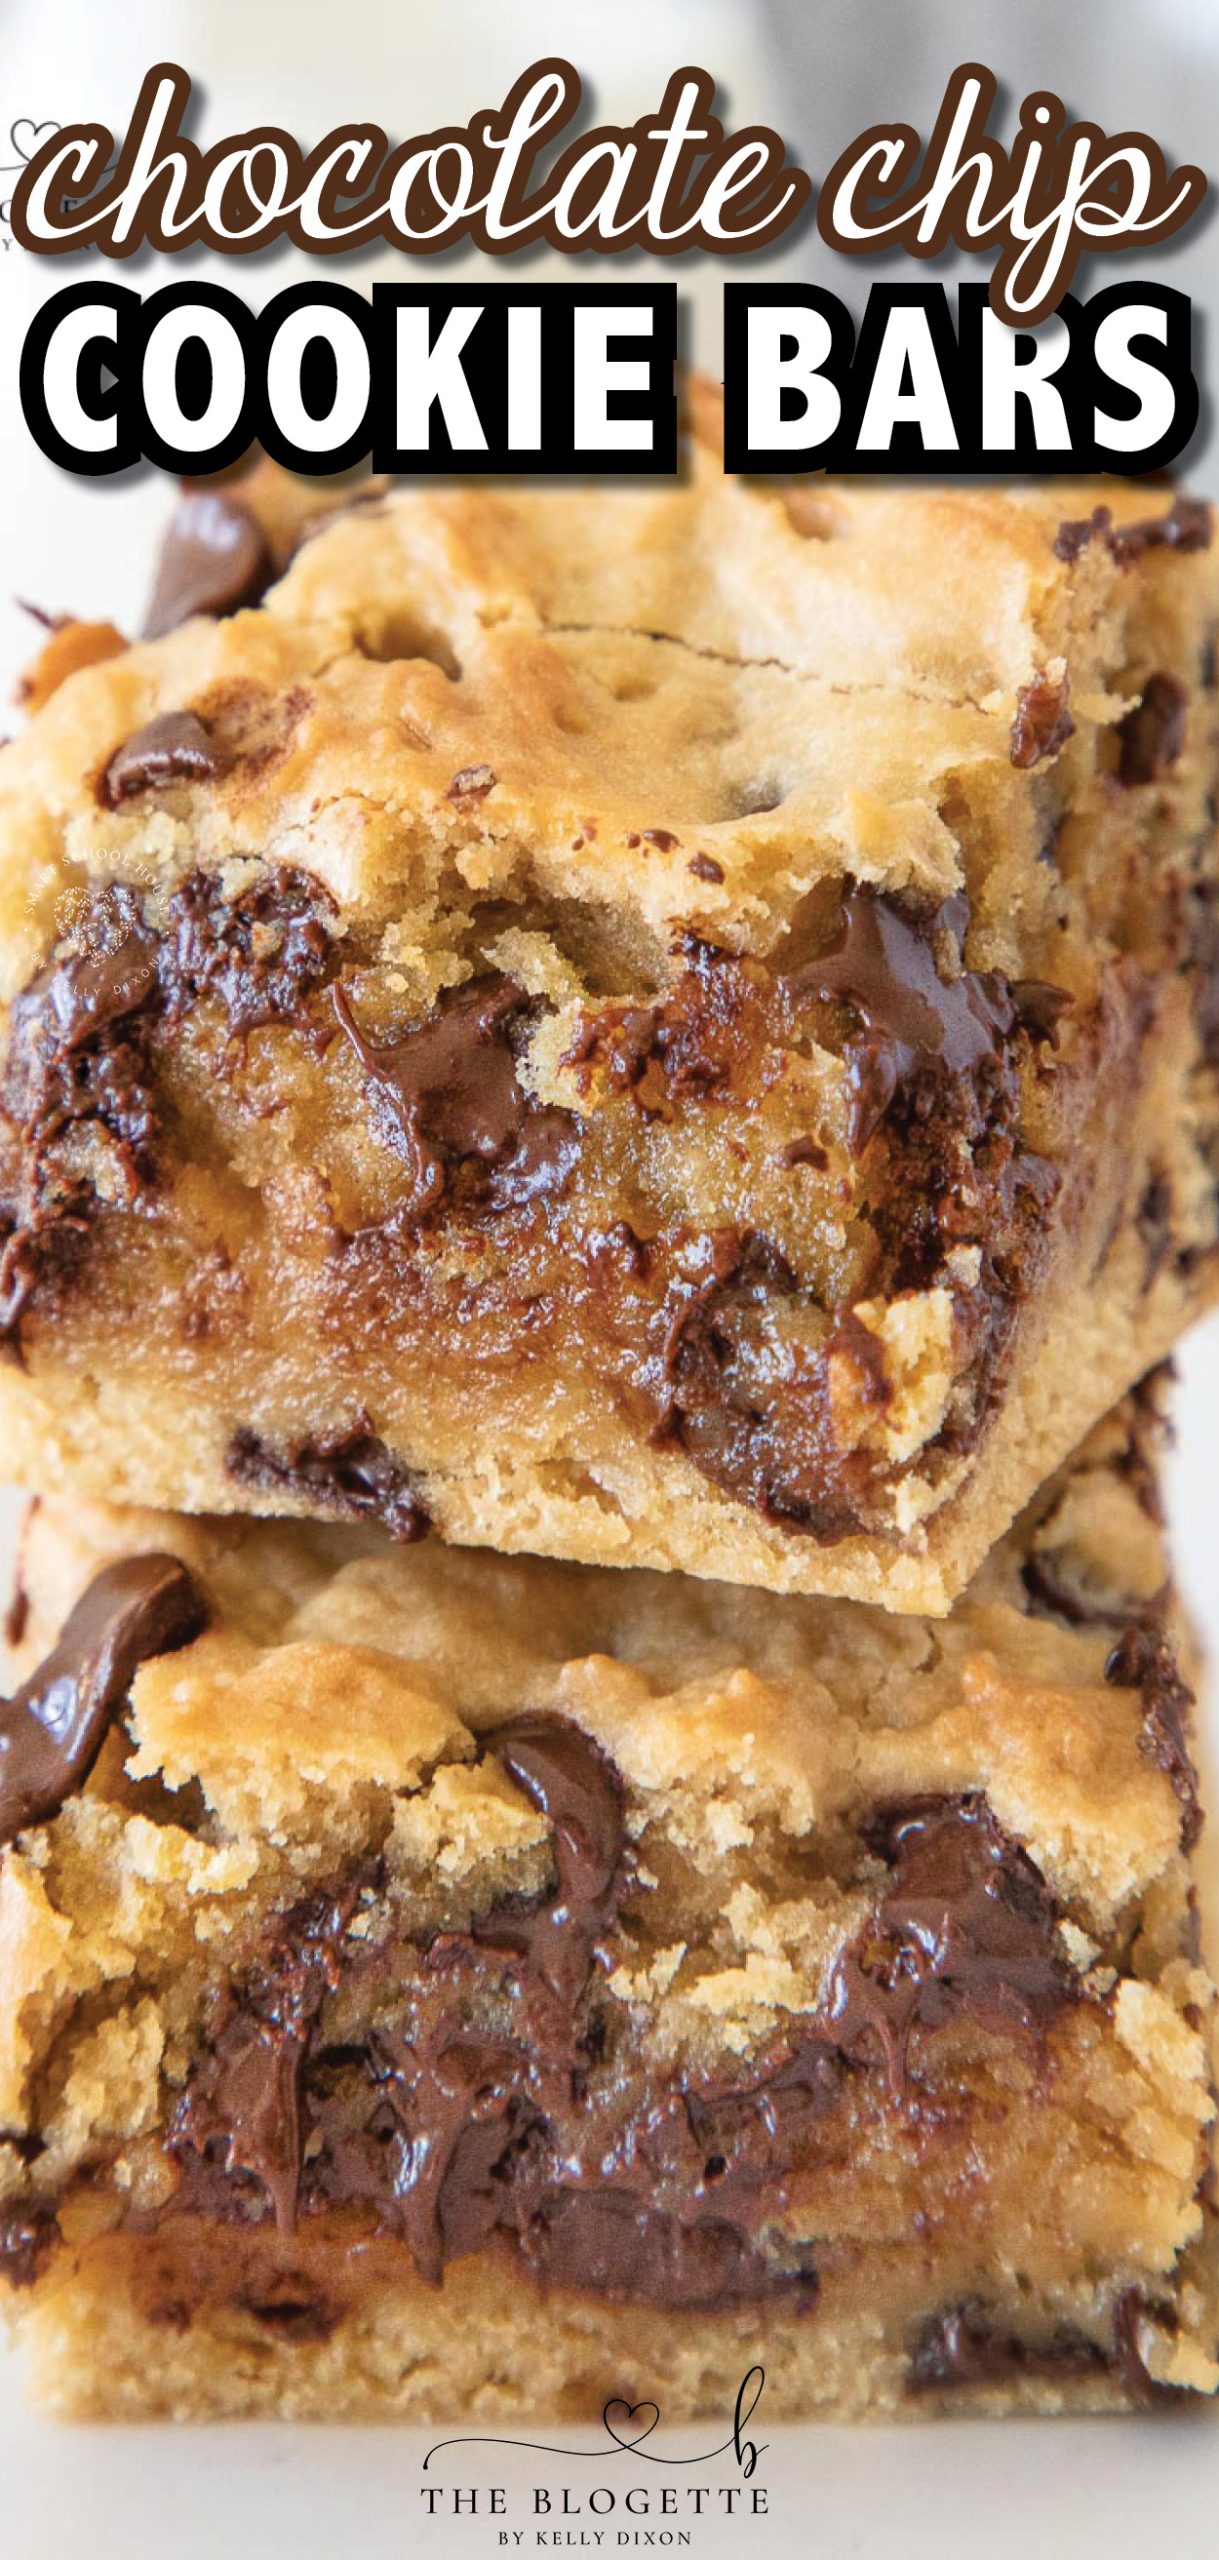 Have you tried the best chocolate chip cookie bars of all time? No? Well, now you can with The Blogette's recipe for ultra-thick bakery-style chocolate chip cookie bars.